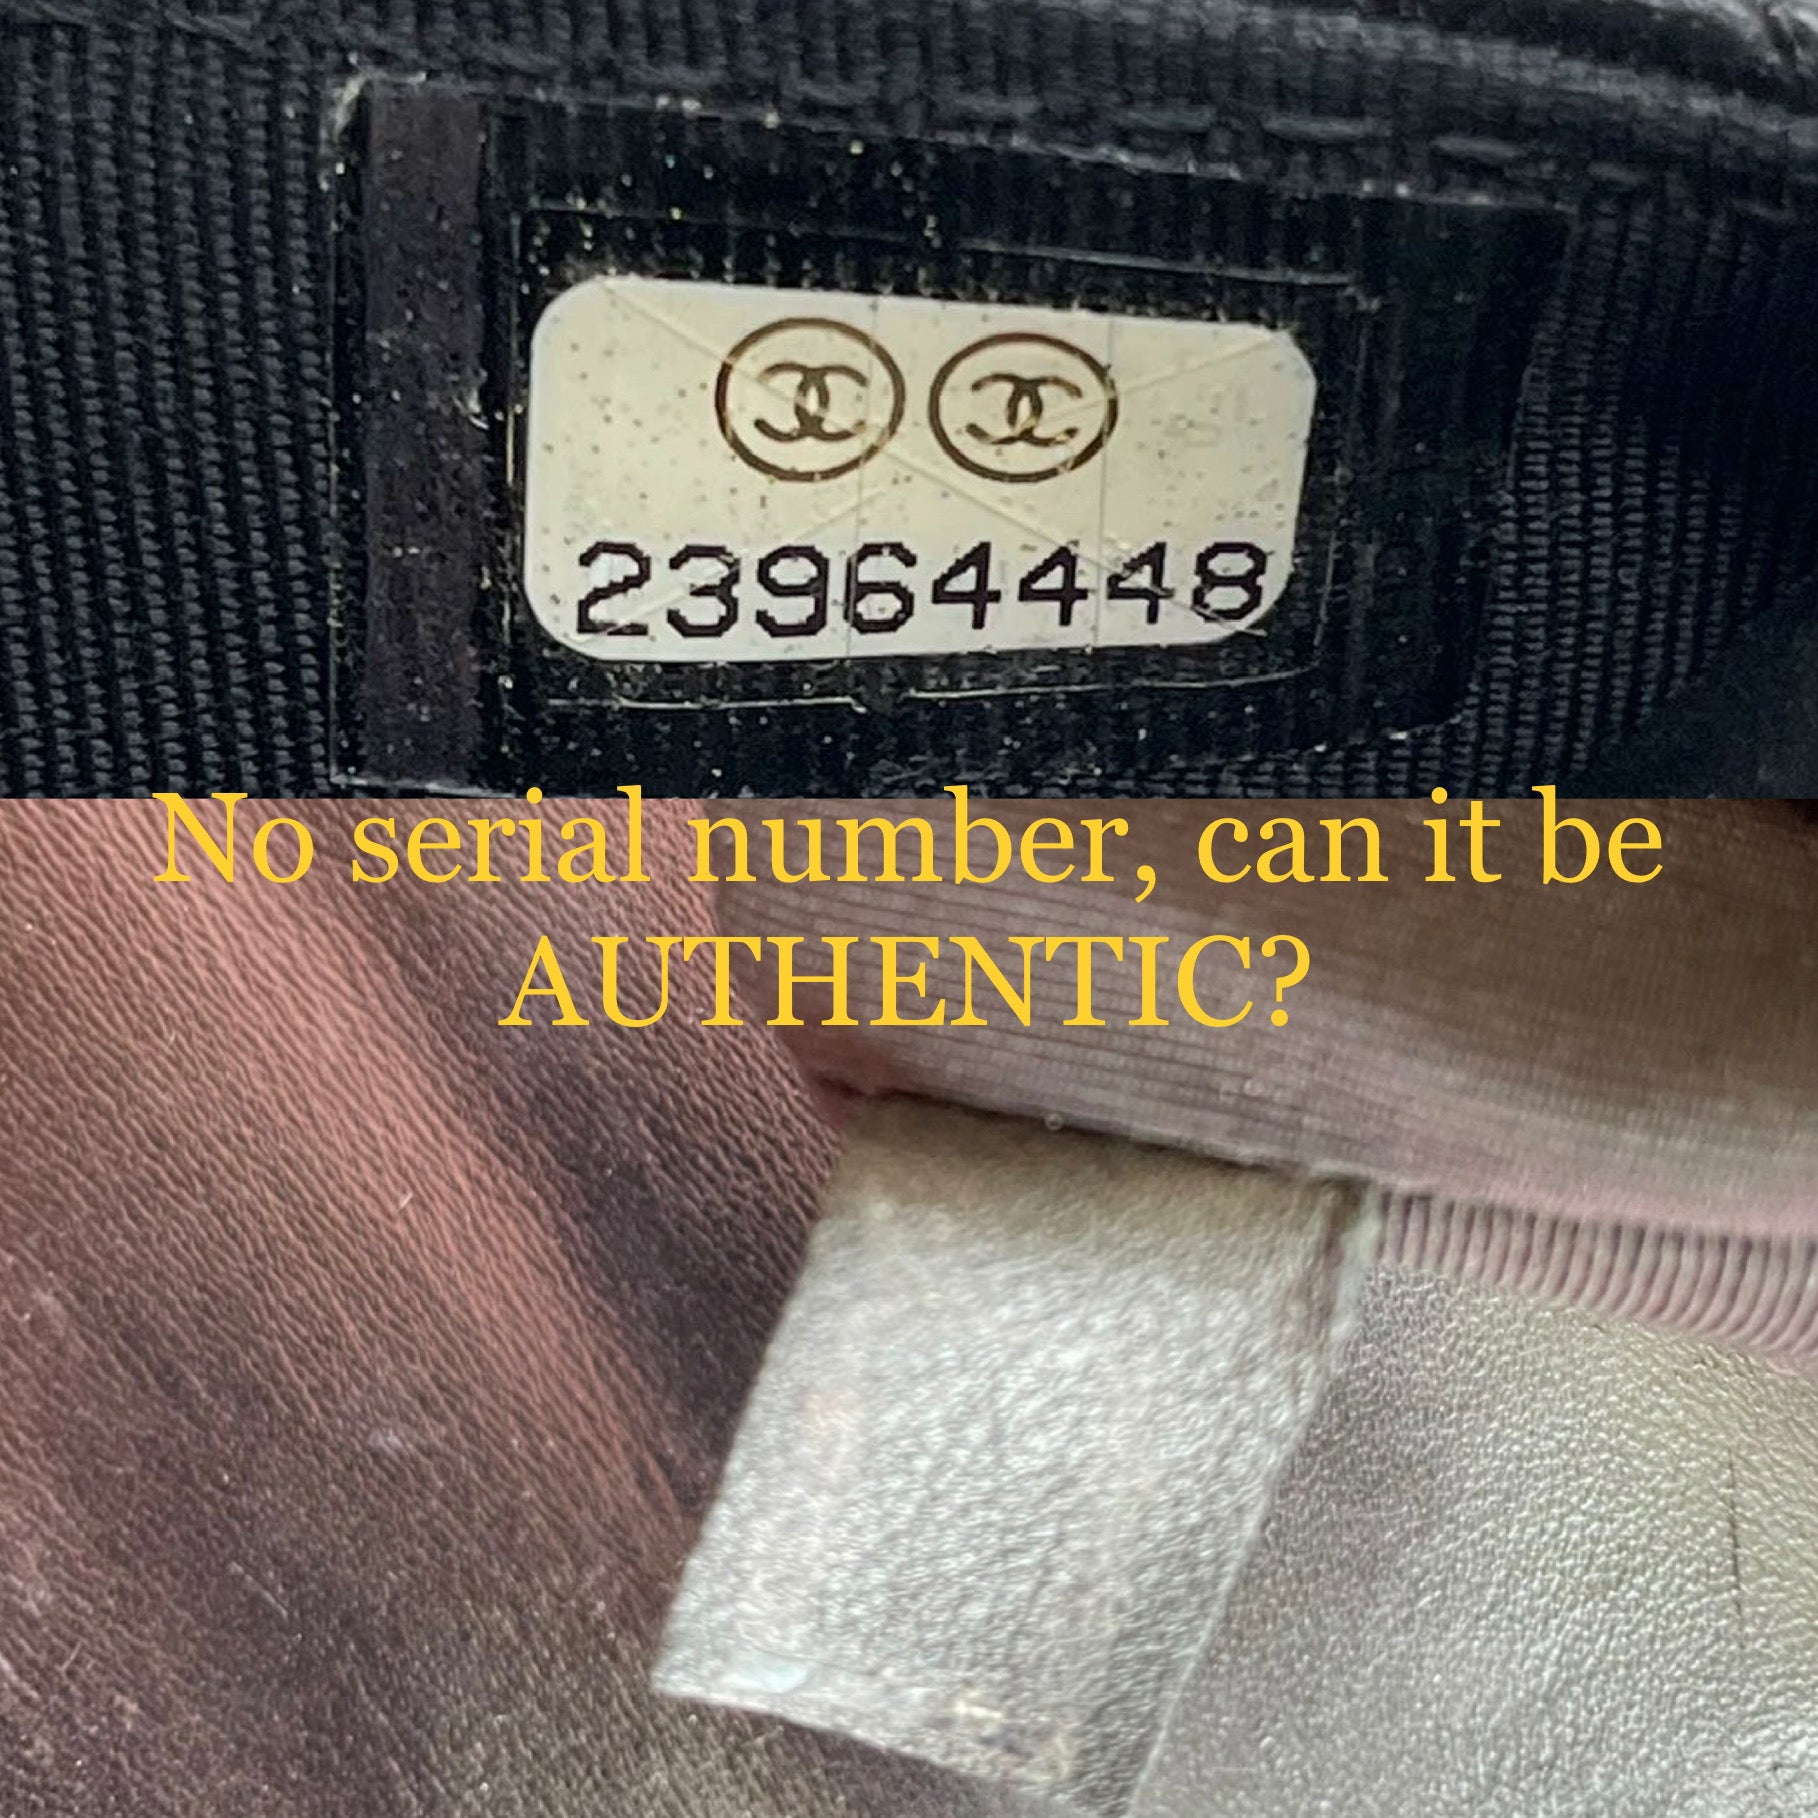 YES Chanel can be authenticated without a serial number sticker